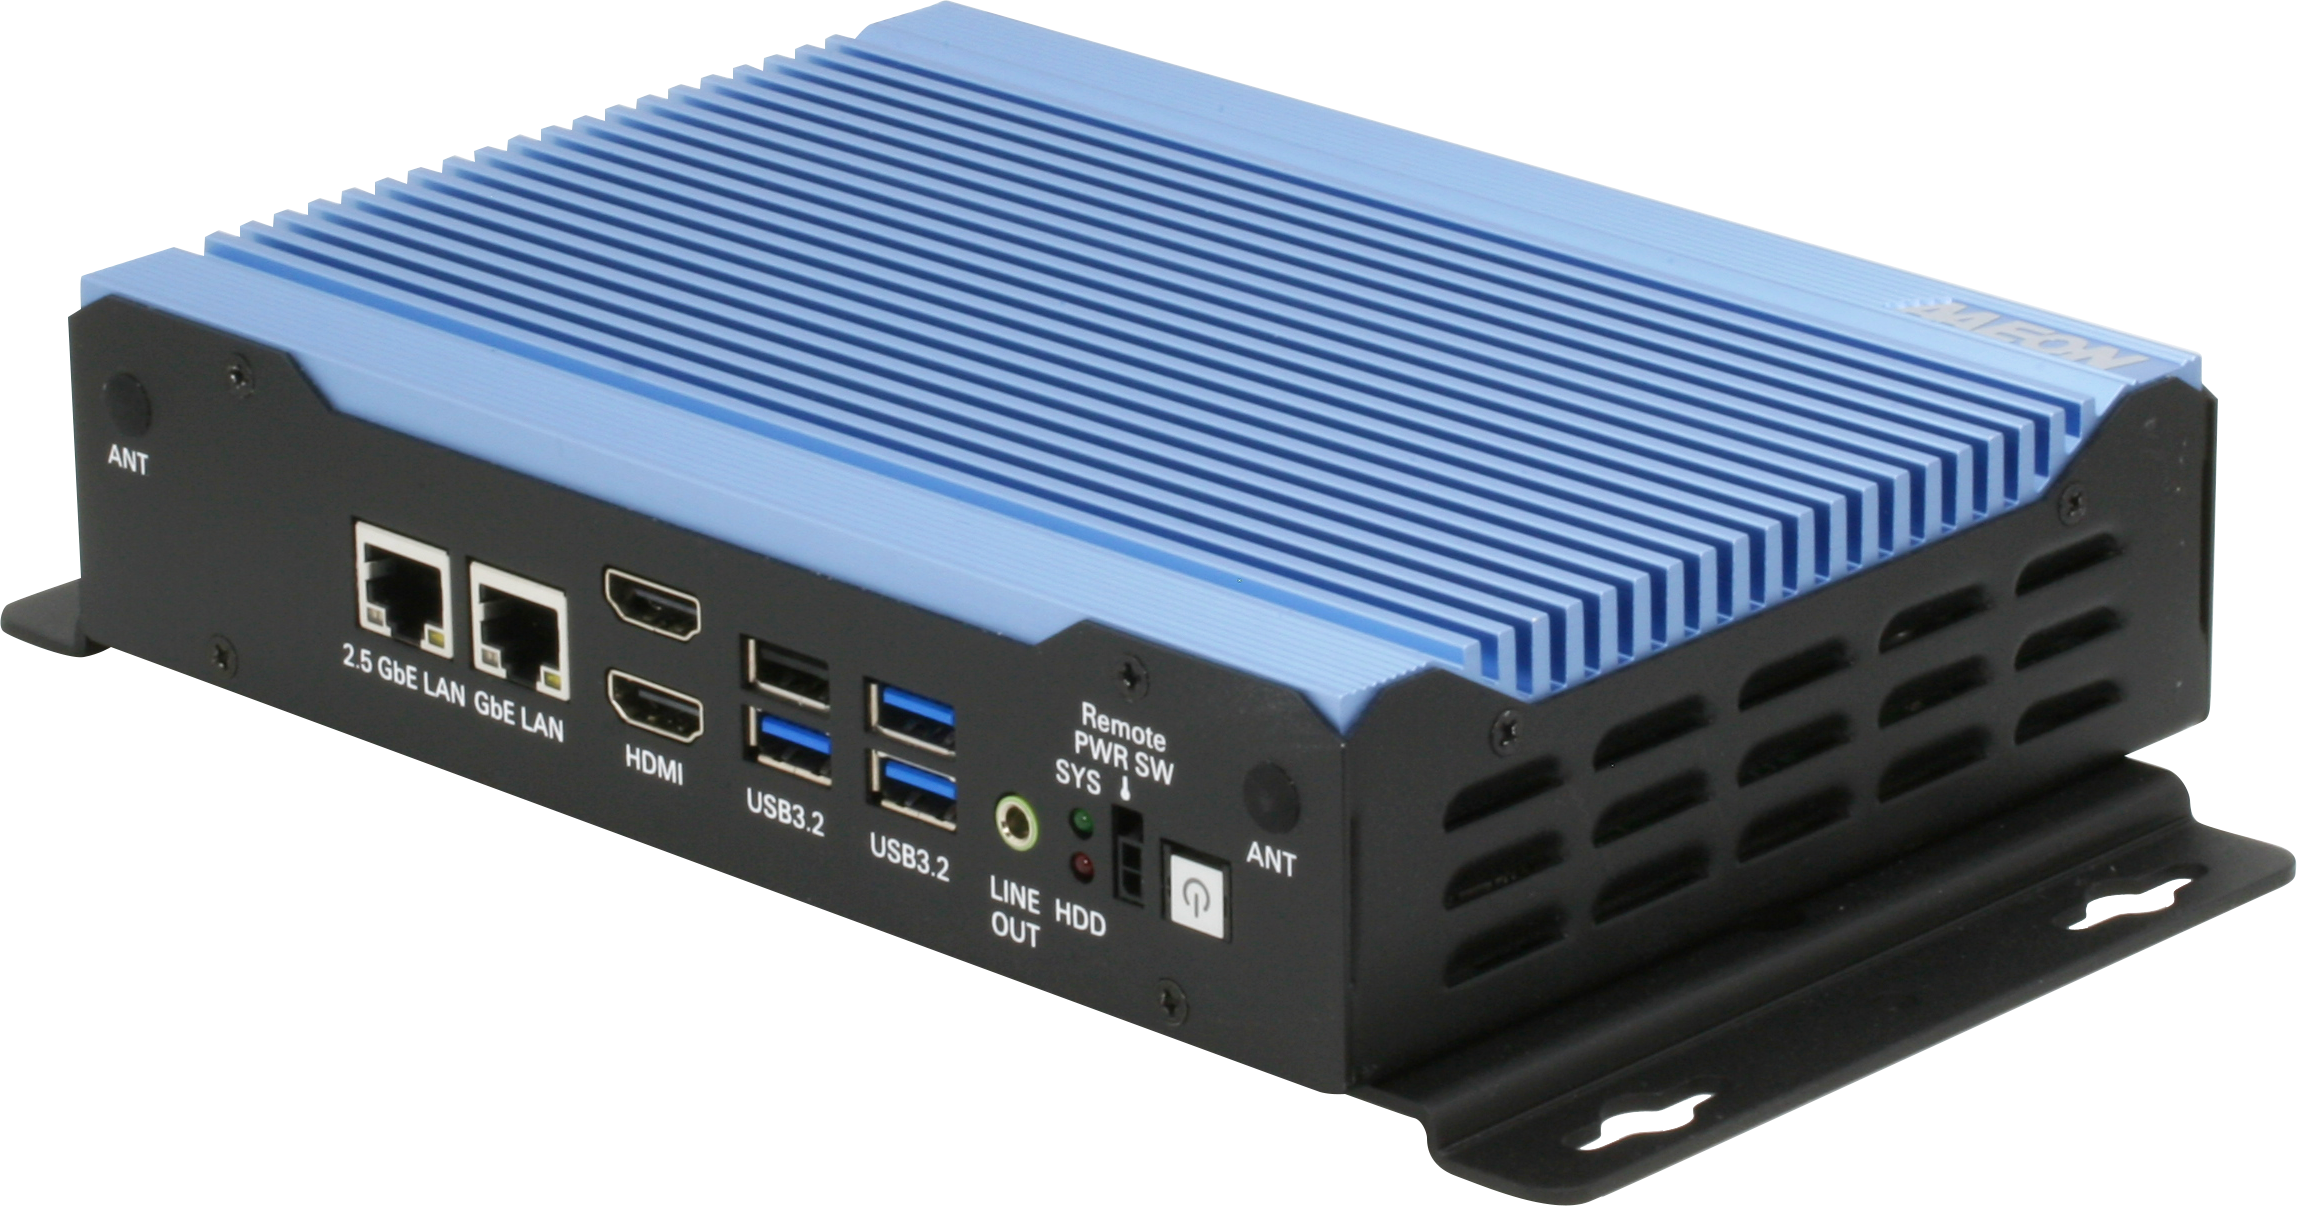 BOXER-6643-TGU: Compact Industrial System Powered by 11th Generation Intel® Core™